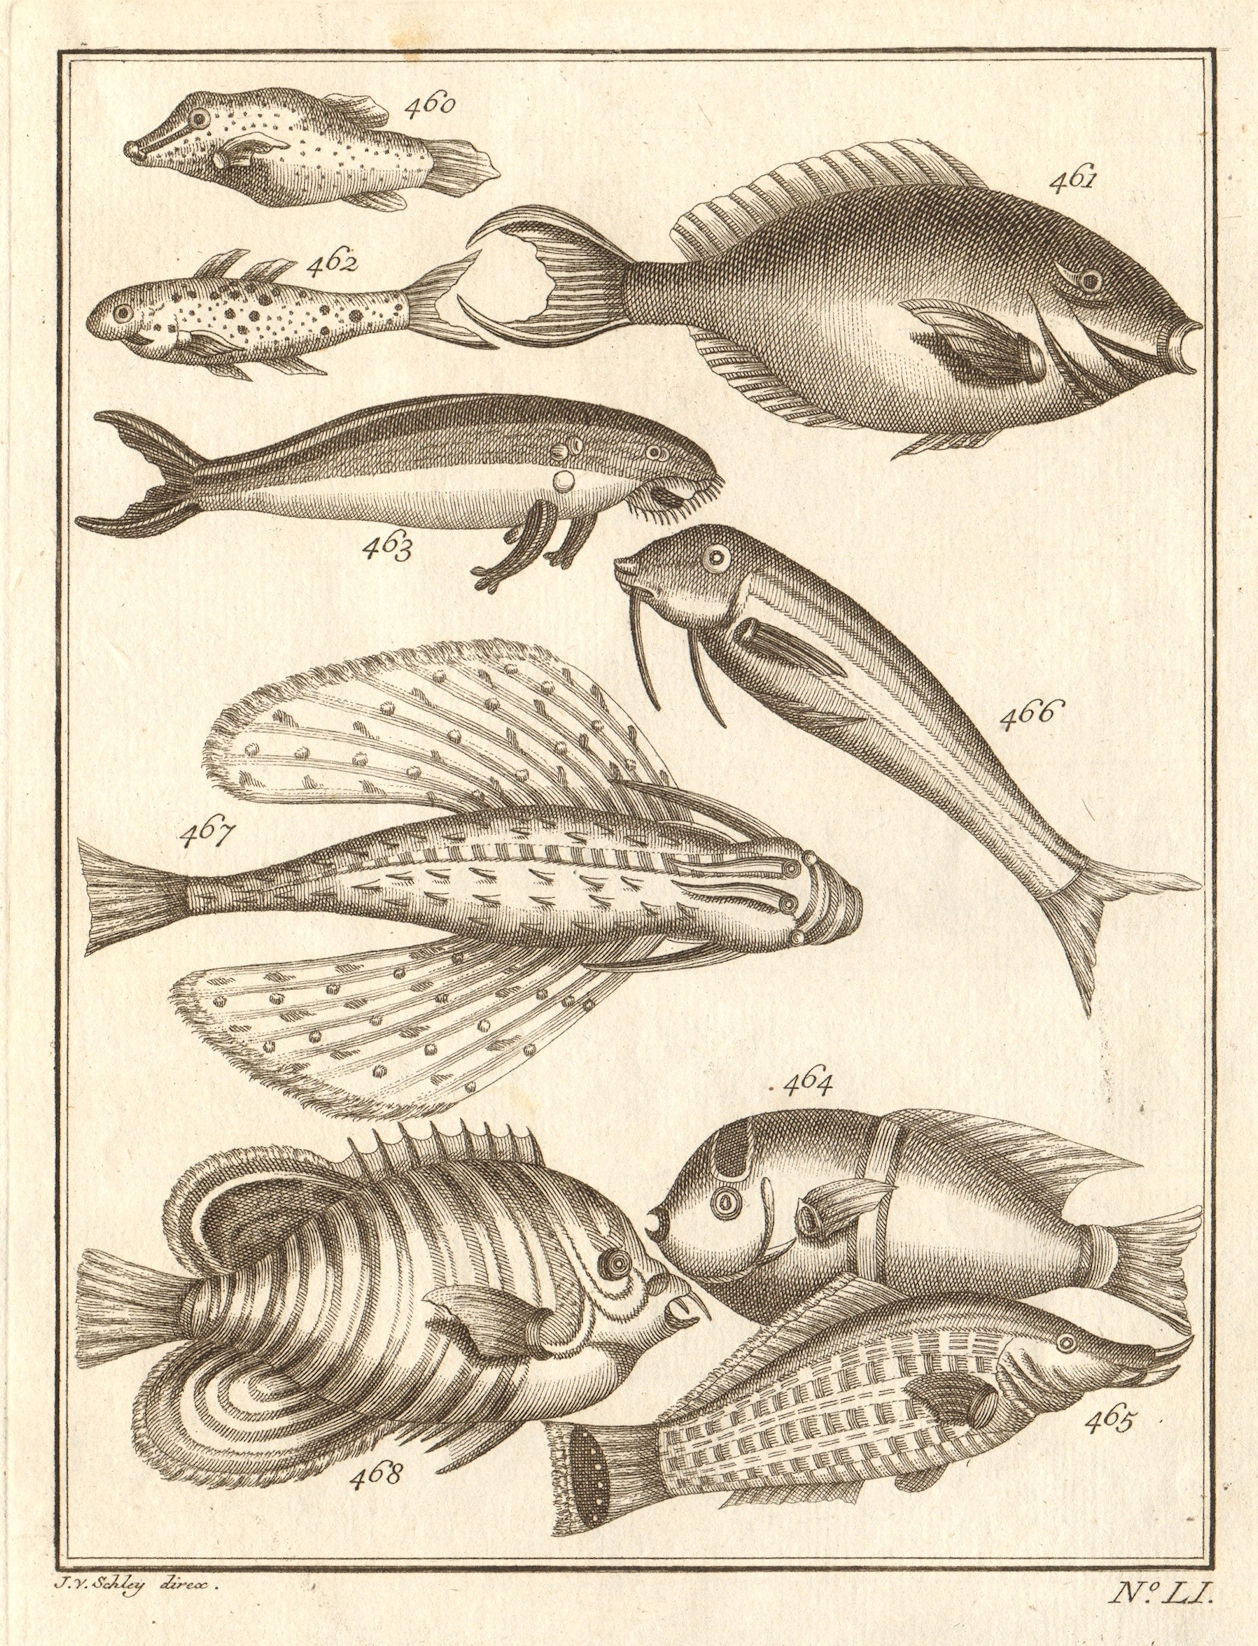 Associate Product LI. Poissons d'Ambione. Indonesia Moluccas Maluku tropical fish. SCHLEY 1763